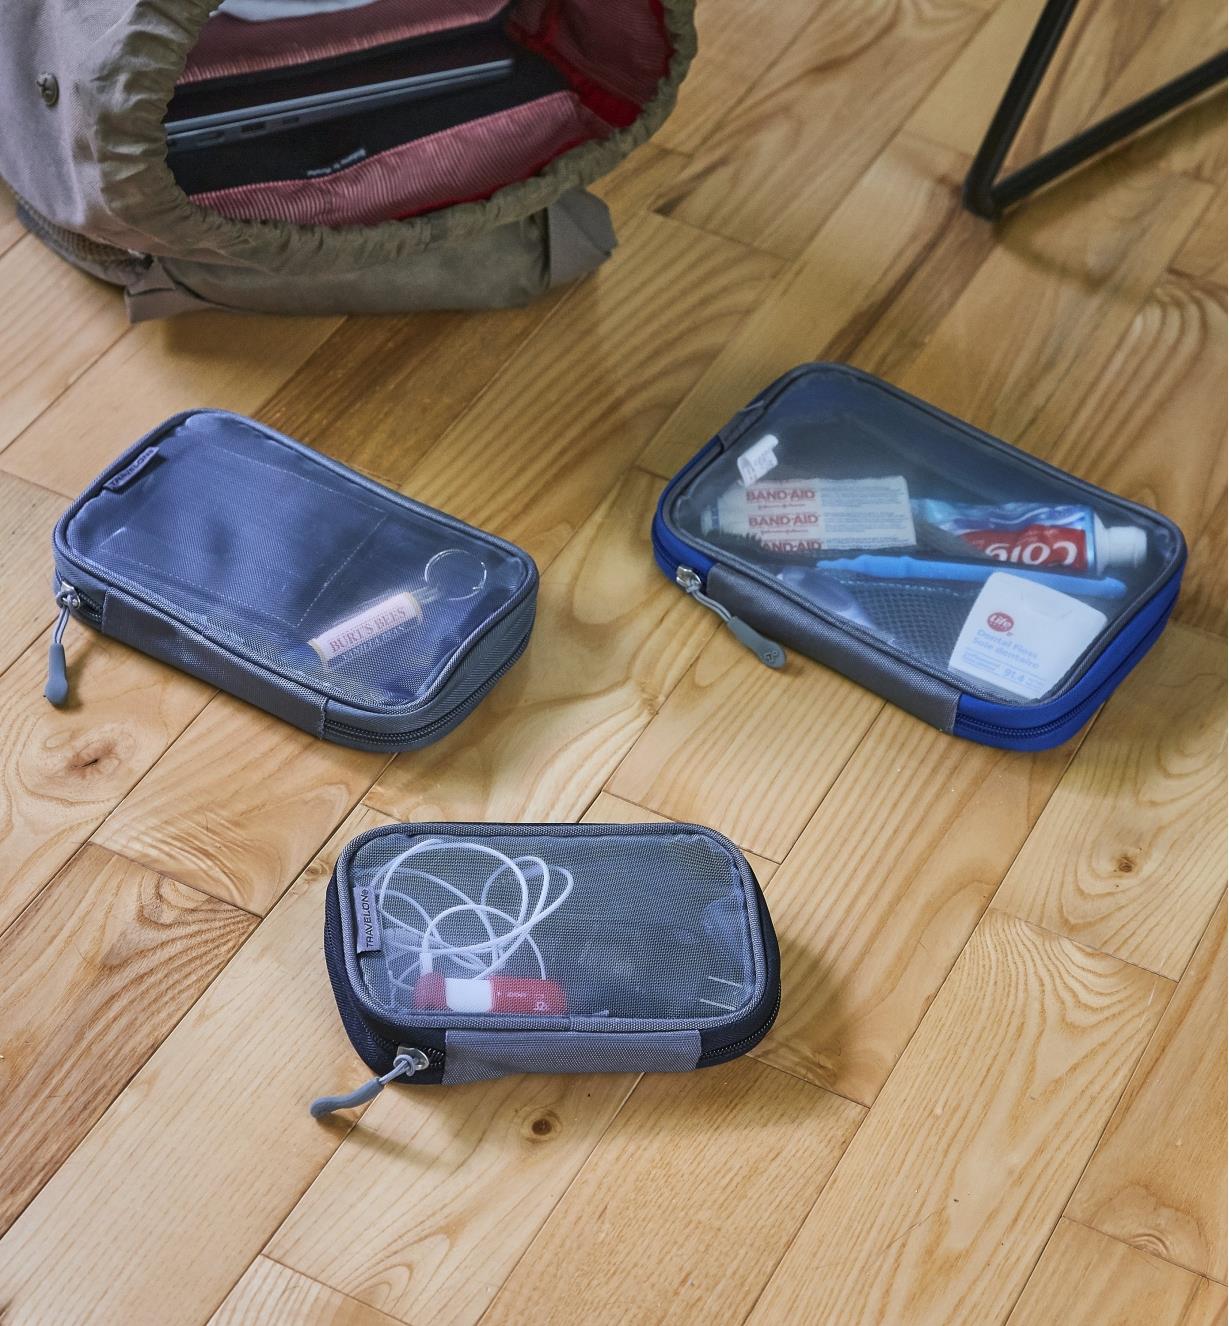 Three travel organizers on a wood floor next to a large backpack